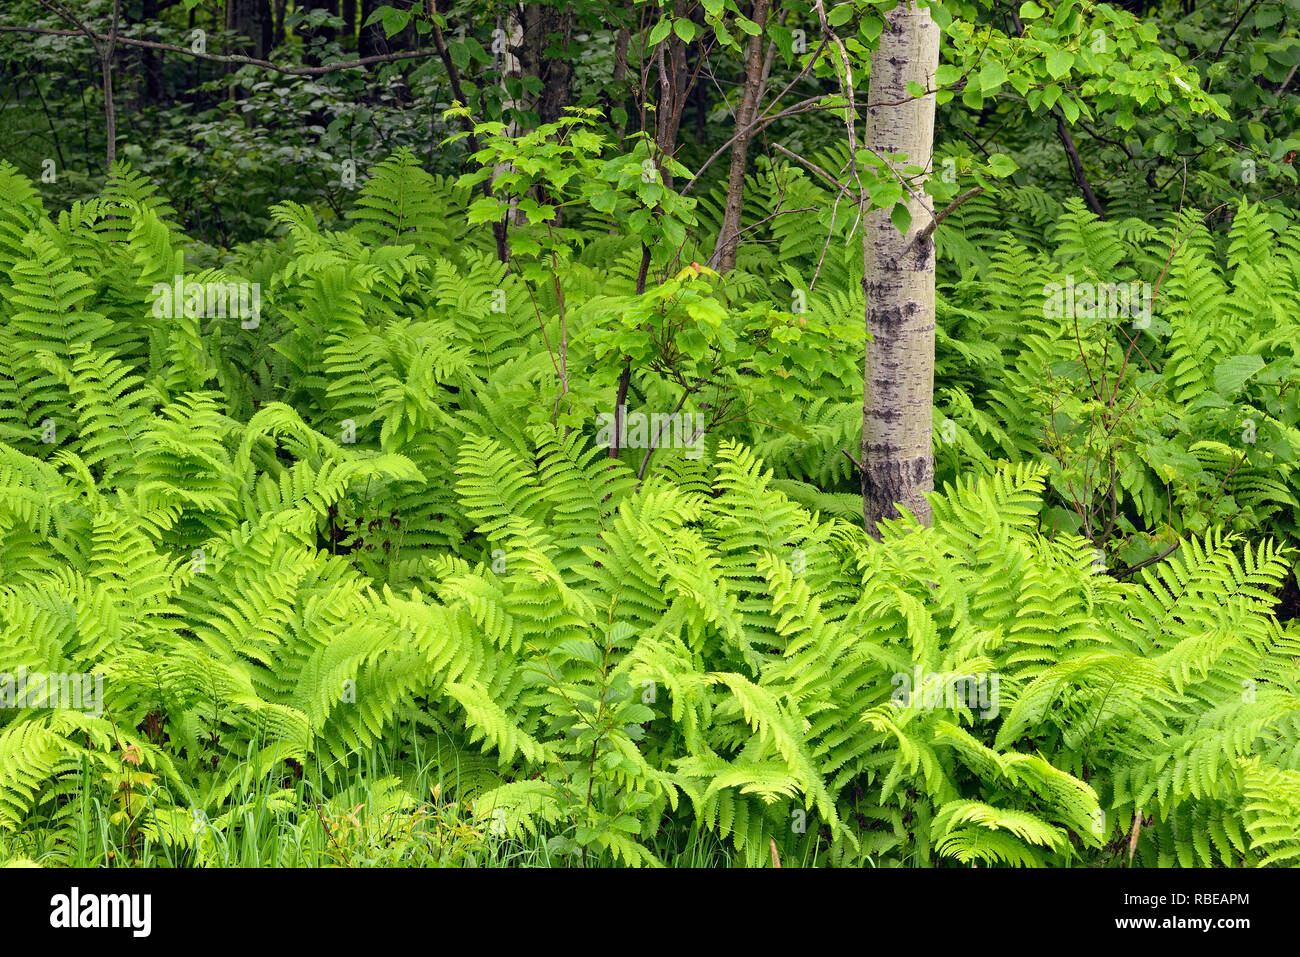 Ferns in the understory of a deciduous woodland, Hwy 63 near Hayward, Wisconsin, USA Stock Photo